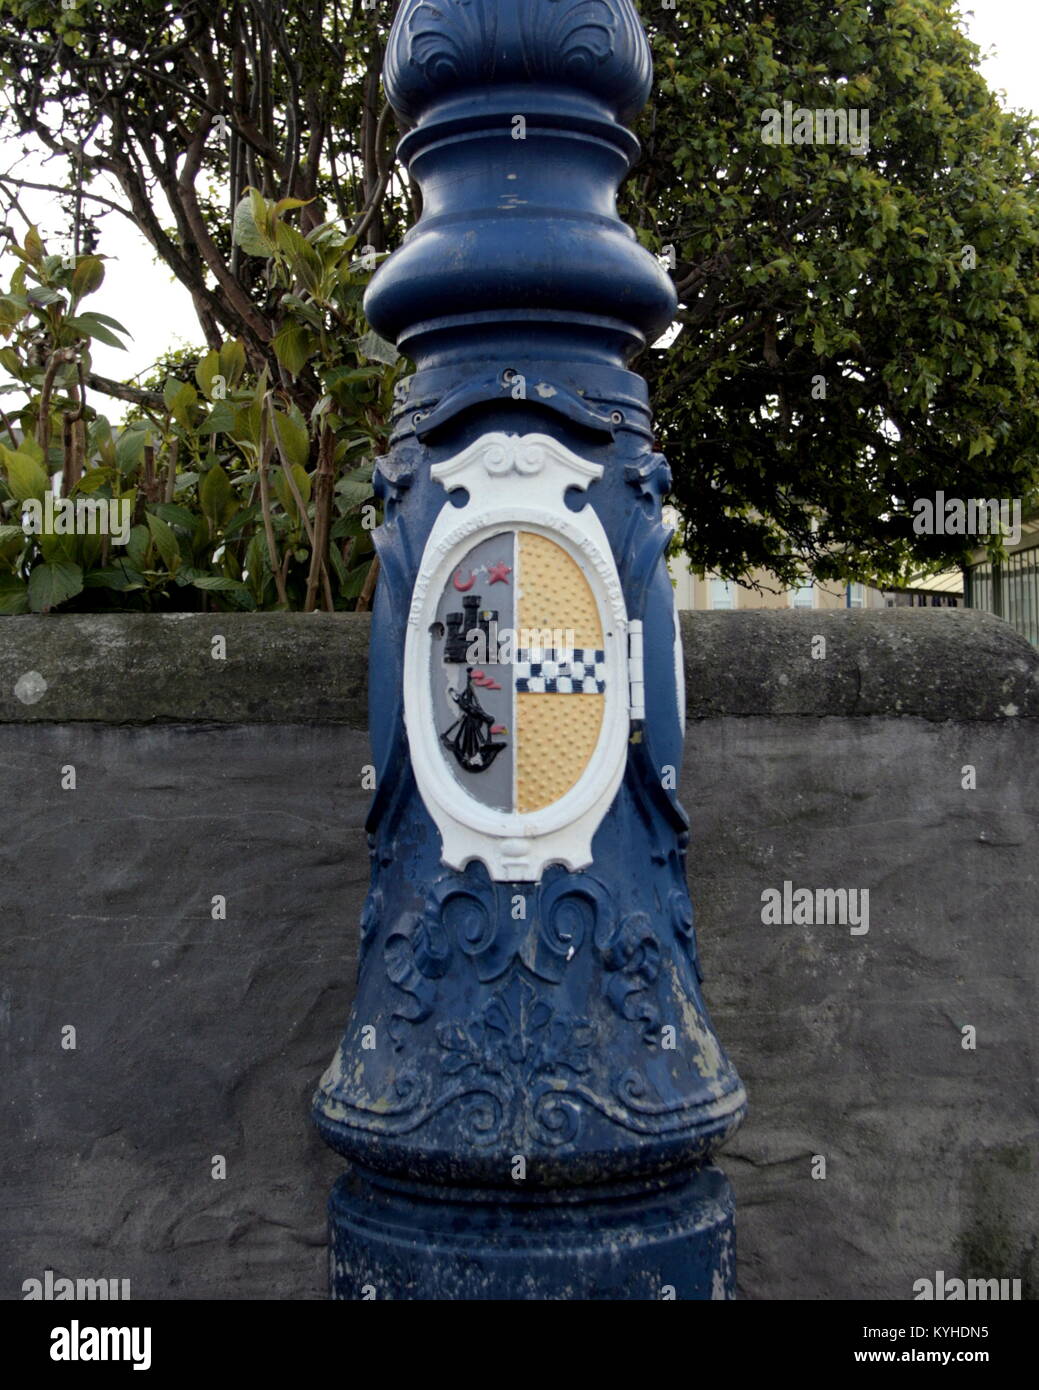 ornate lamppost with town crest coat of arms freshly painted Rothesay, United Kingdom Stock Photo